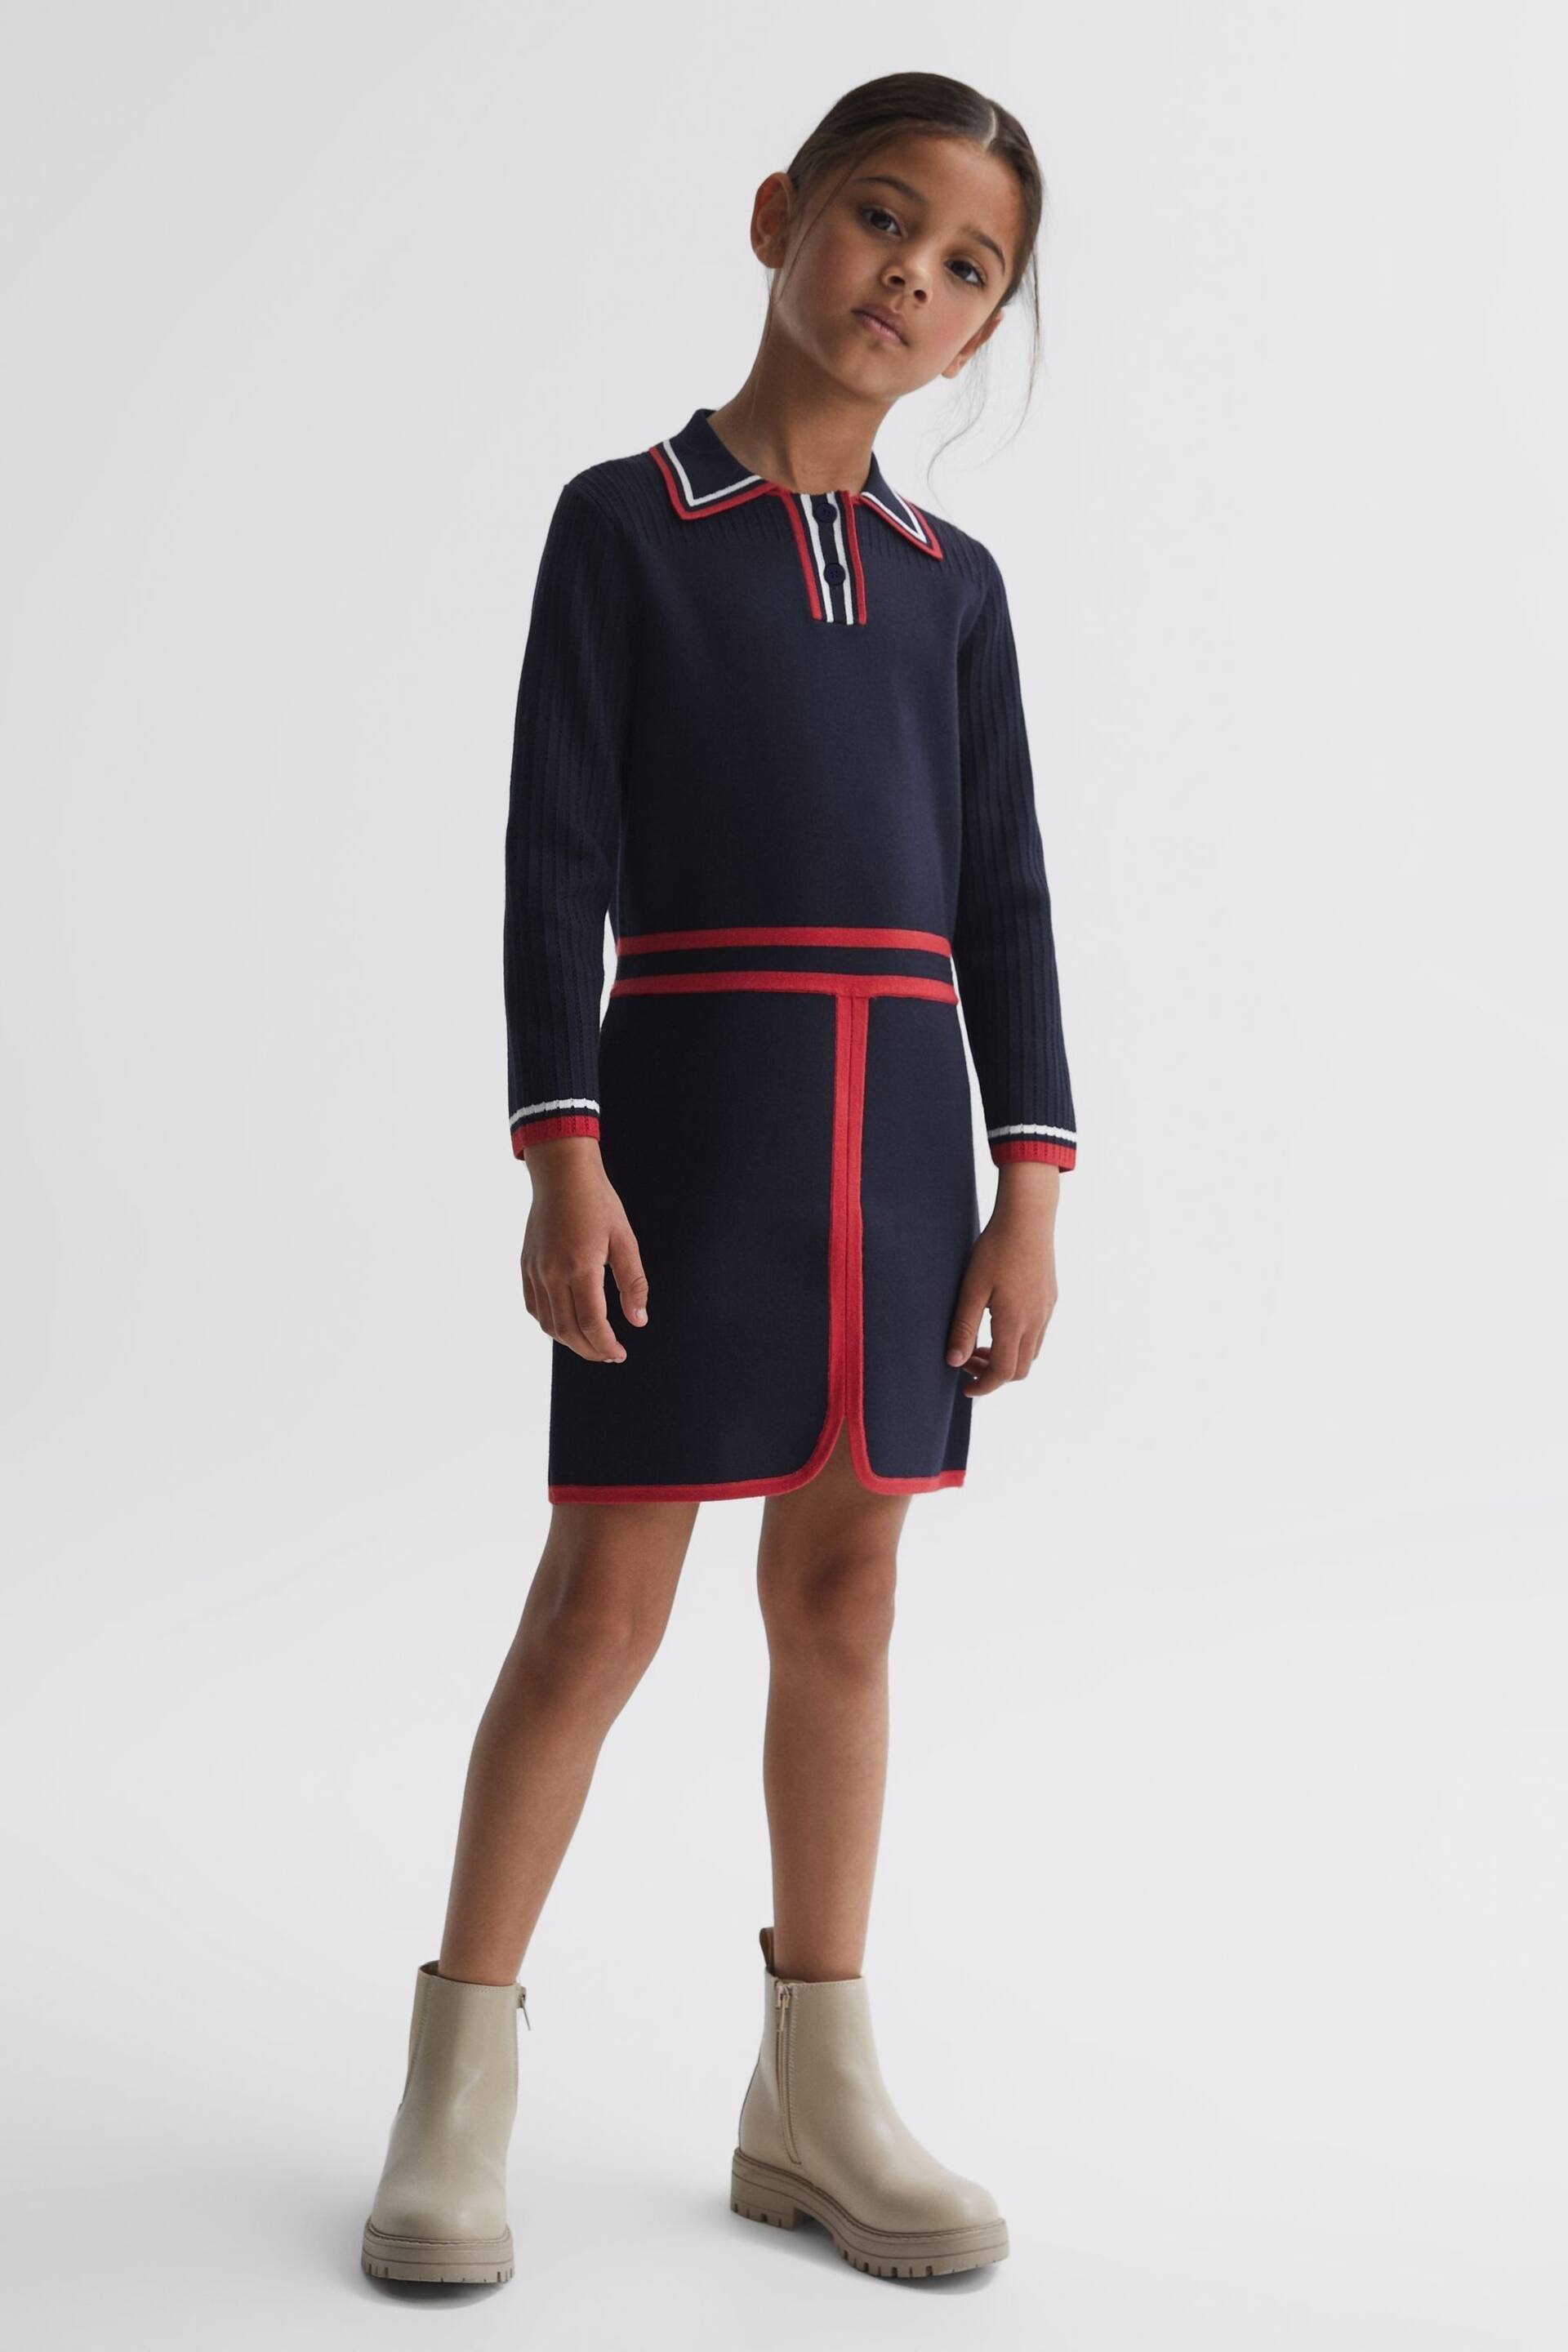 Reiss Navy Ruby Senior Knitted Polo Dress - Image 1 of 6